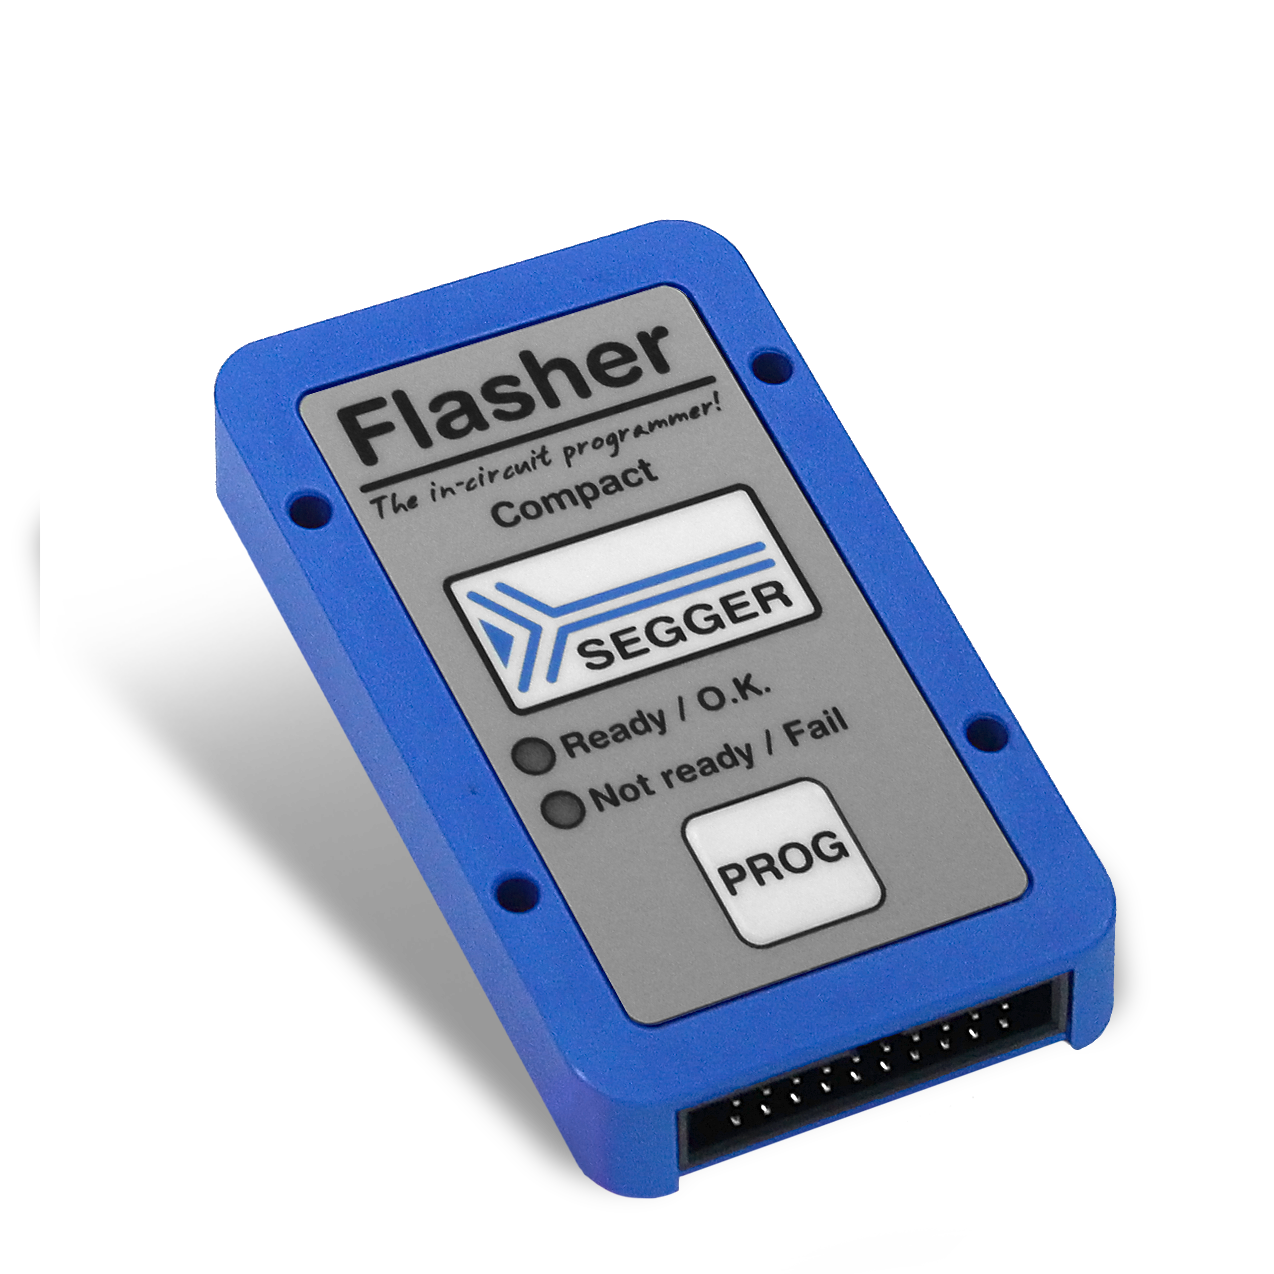 SEGGER Flasher Compact, blue casing with logo